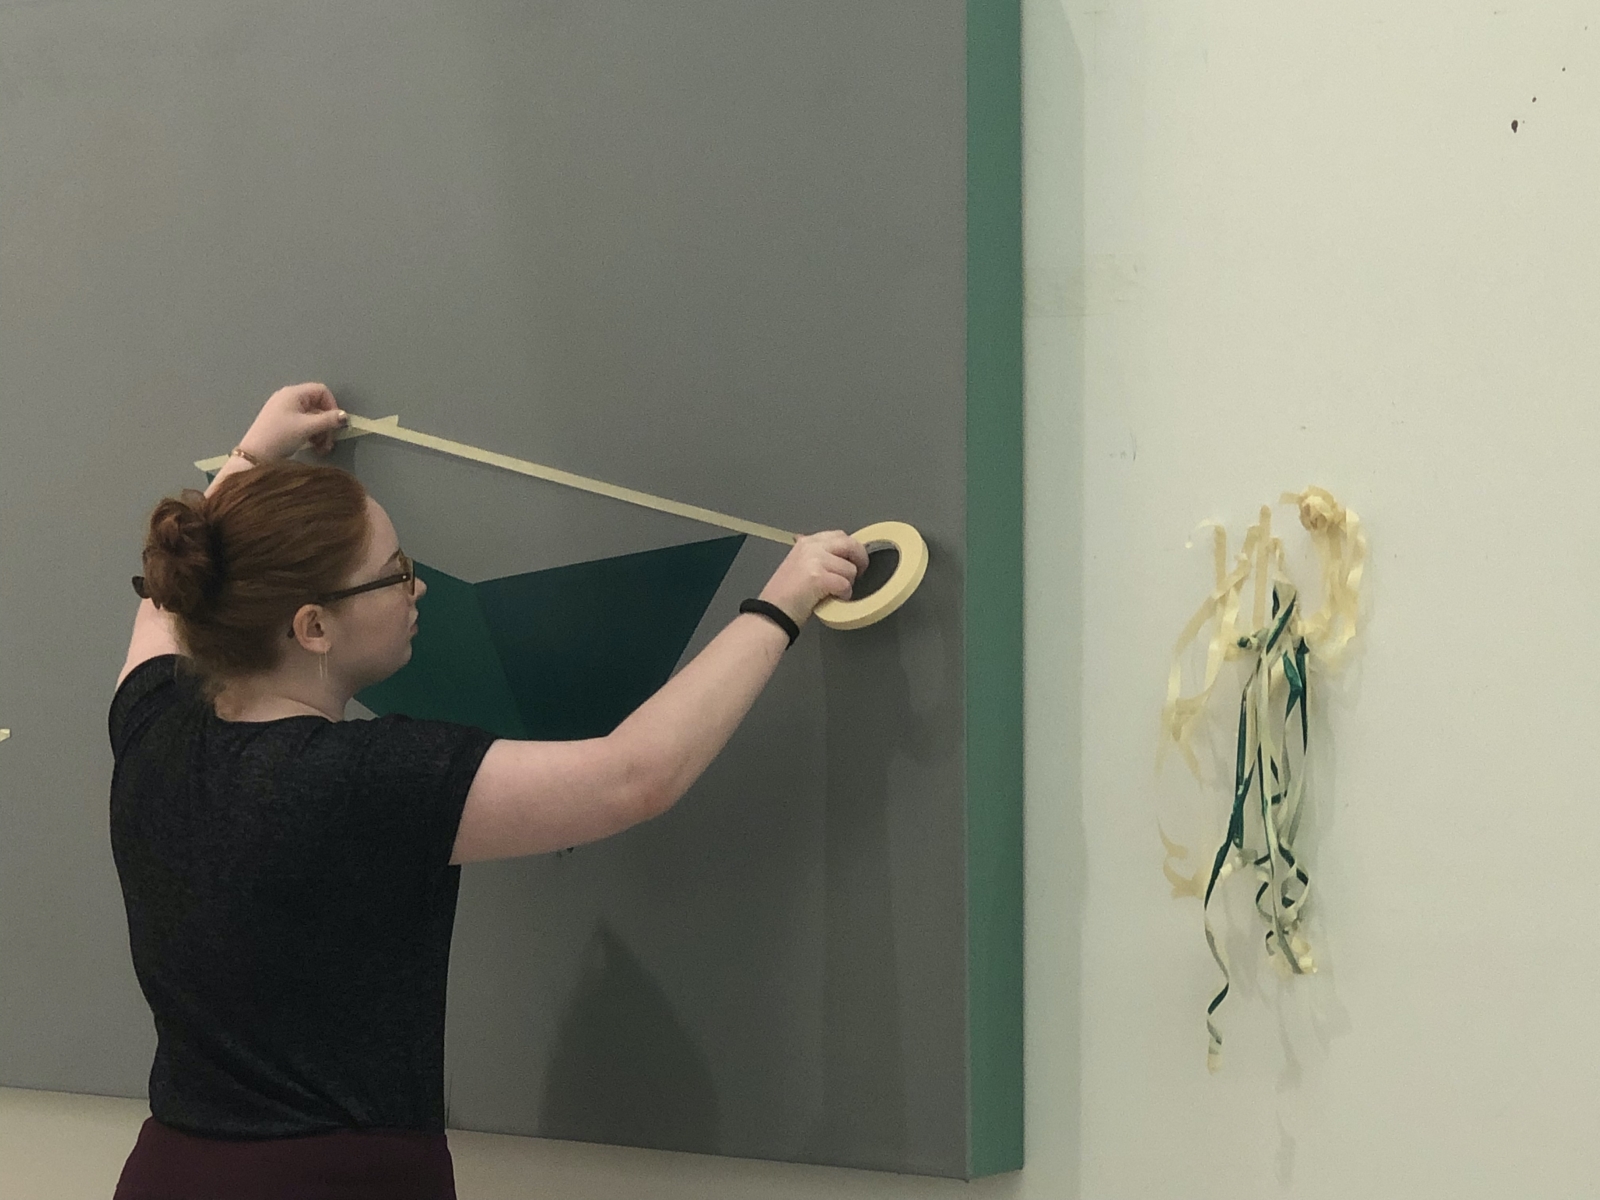 Student stretches masking tape across the surface of a prepared canvas covered in gray and green paint.